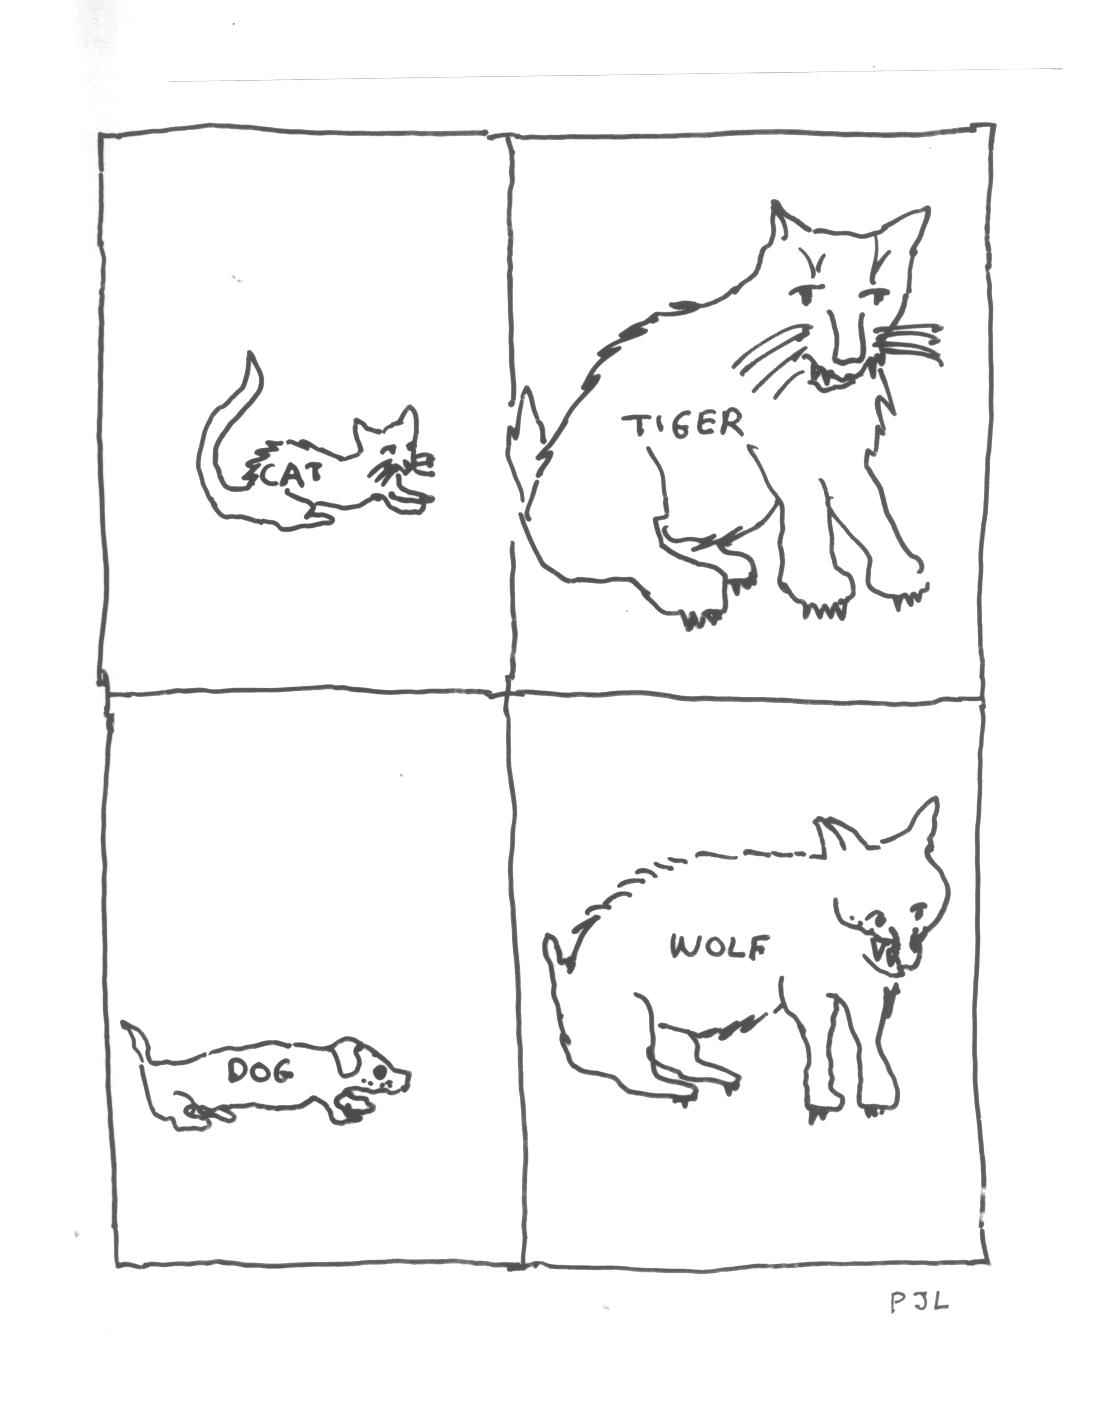 Cartoon reresenting the classification  of animals according to size (horizontally) or according to shape (vertically), ref.: drawing by the author ( P J Lewi)